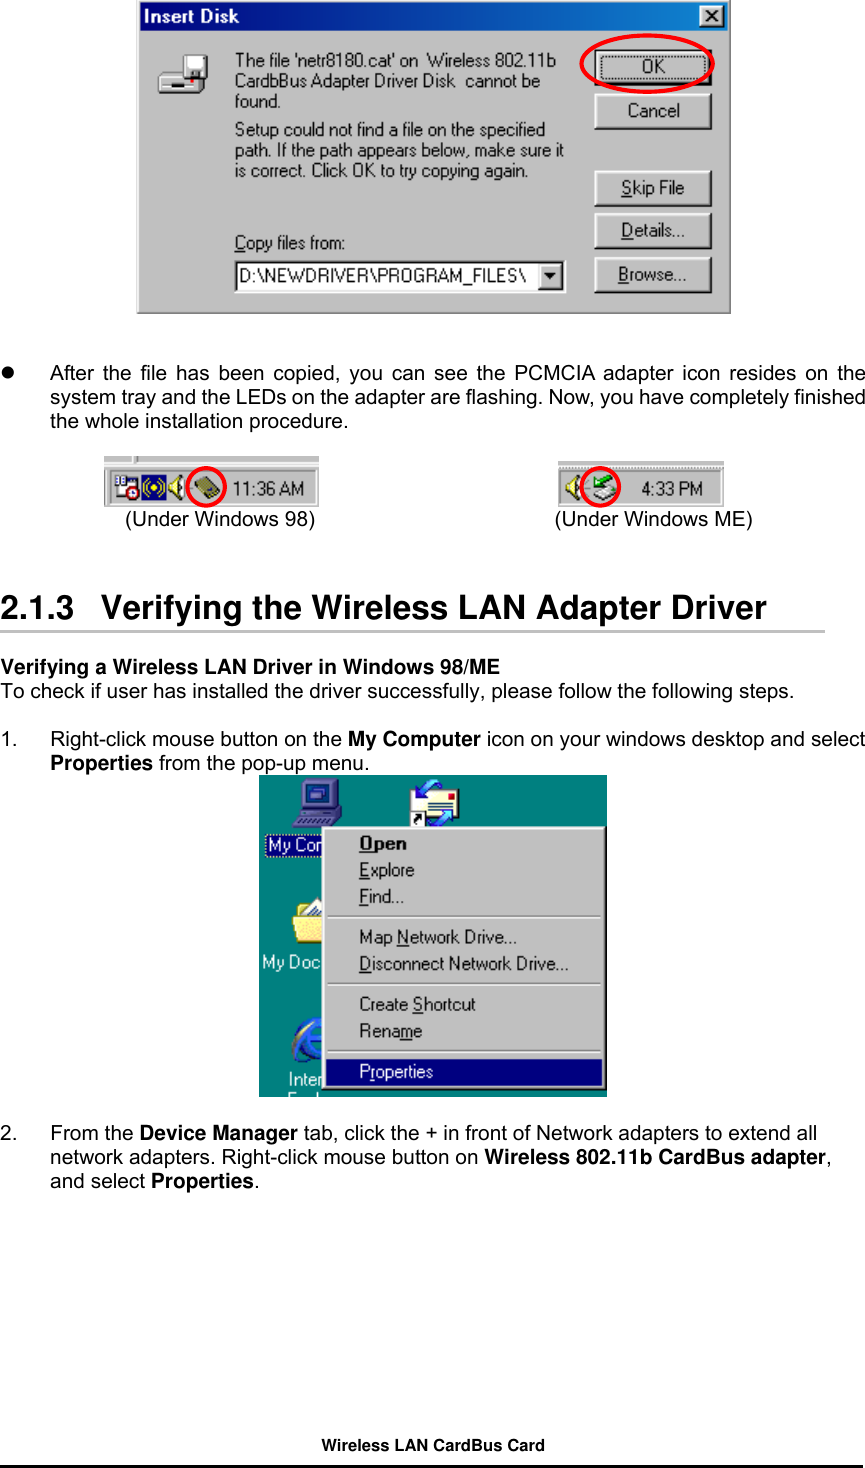      After the file has been copied, you can see the PCMCIA adapter icon resides on the system tray and the LEDs on the adapter are flashing. Now, you have completely finished the whole installation procedure.                           (Under Windows 98)                       (Under Windows ME)   2.1.3   Verifying the Wireless LAN Adapter Driver    Verifying a Wireless LAN Driver in Windows 98/ME         To check if user has installed the driver successfully, please follow the following steps.  1.  Right-click mouse button on the My Computer icon on your windows desktop and select Properties from the pop-up menu.   2. From the Device Manager tab, click the + in front of Network adapters to extend all network adapters. Right-click mouse button on Wireless 802.11b CardBus adapter, and select Properties. Wireless LAN CardBus Card 